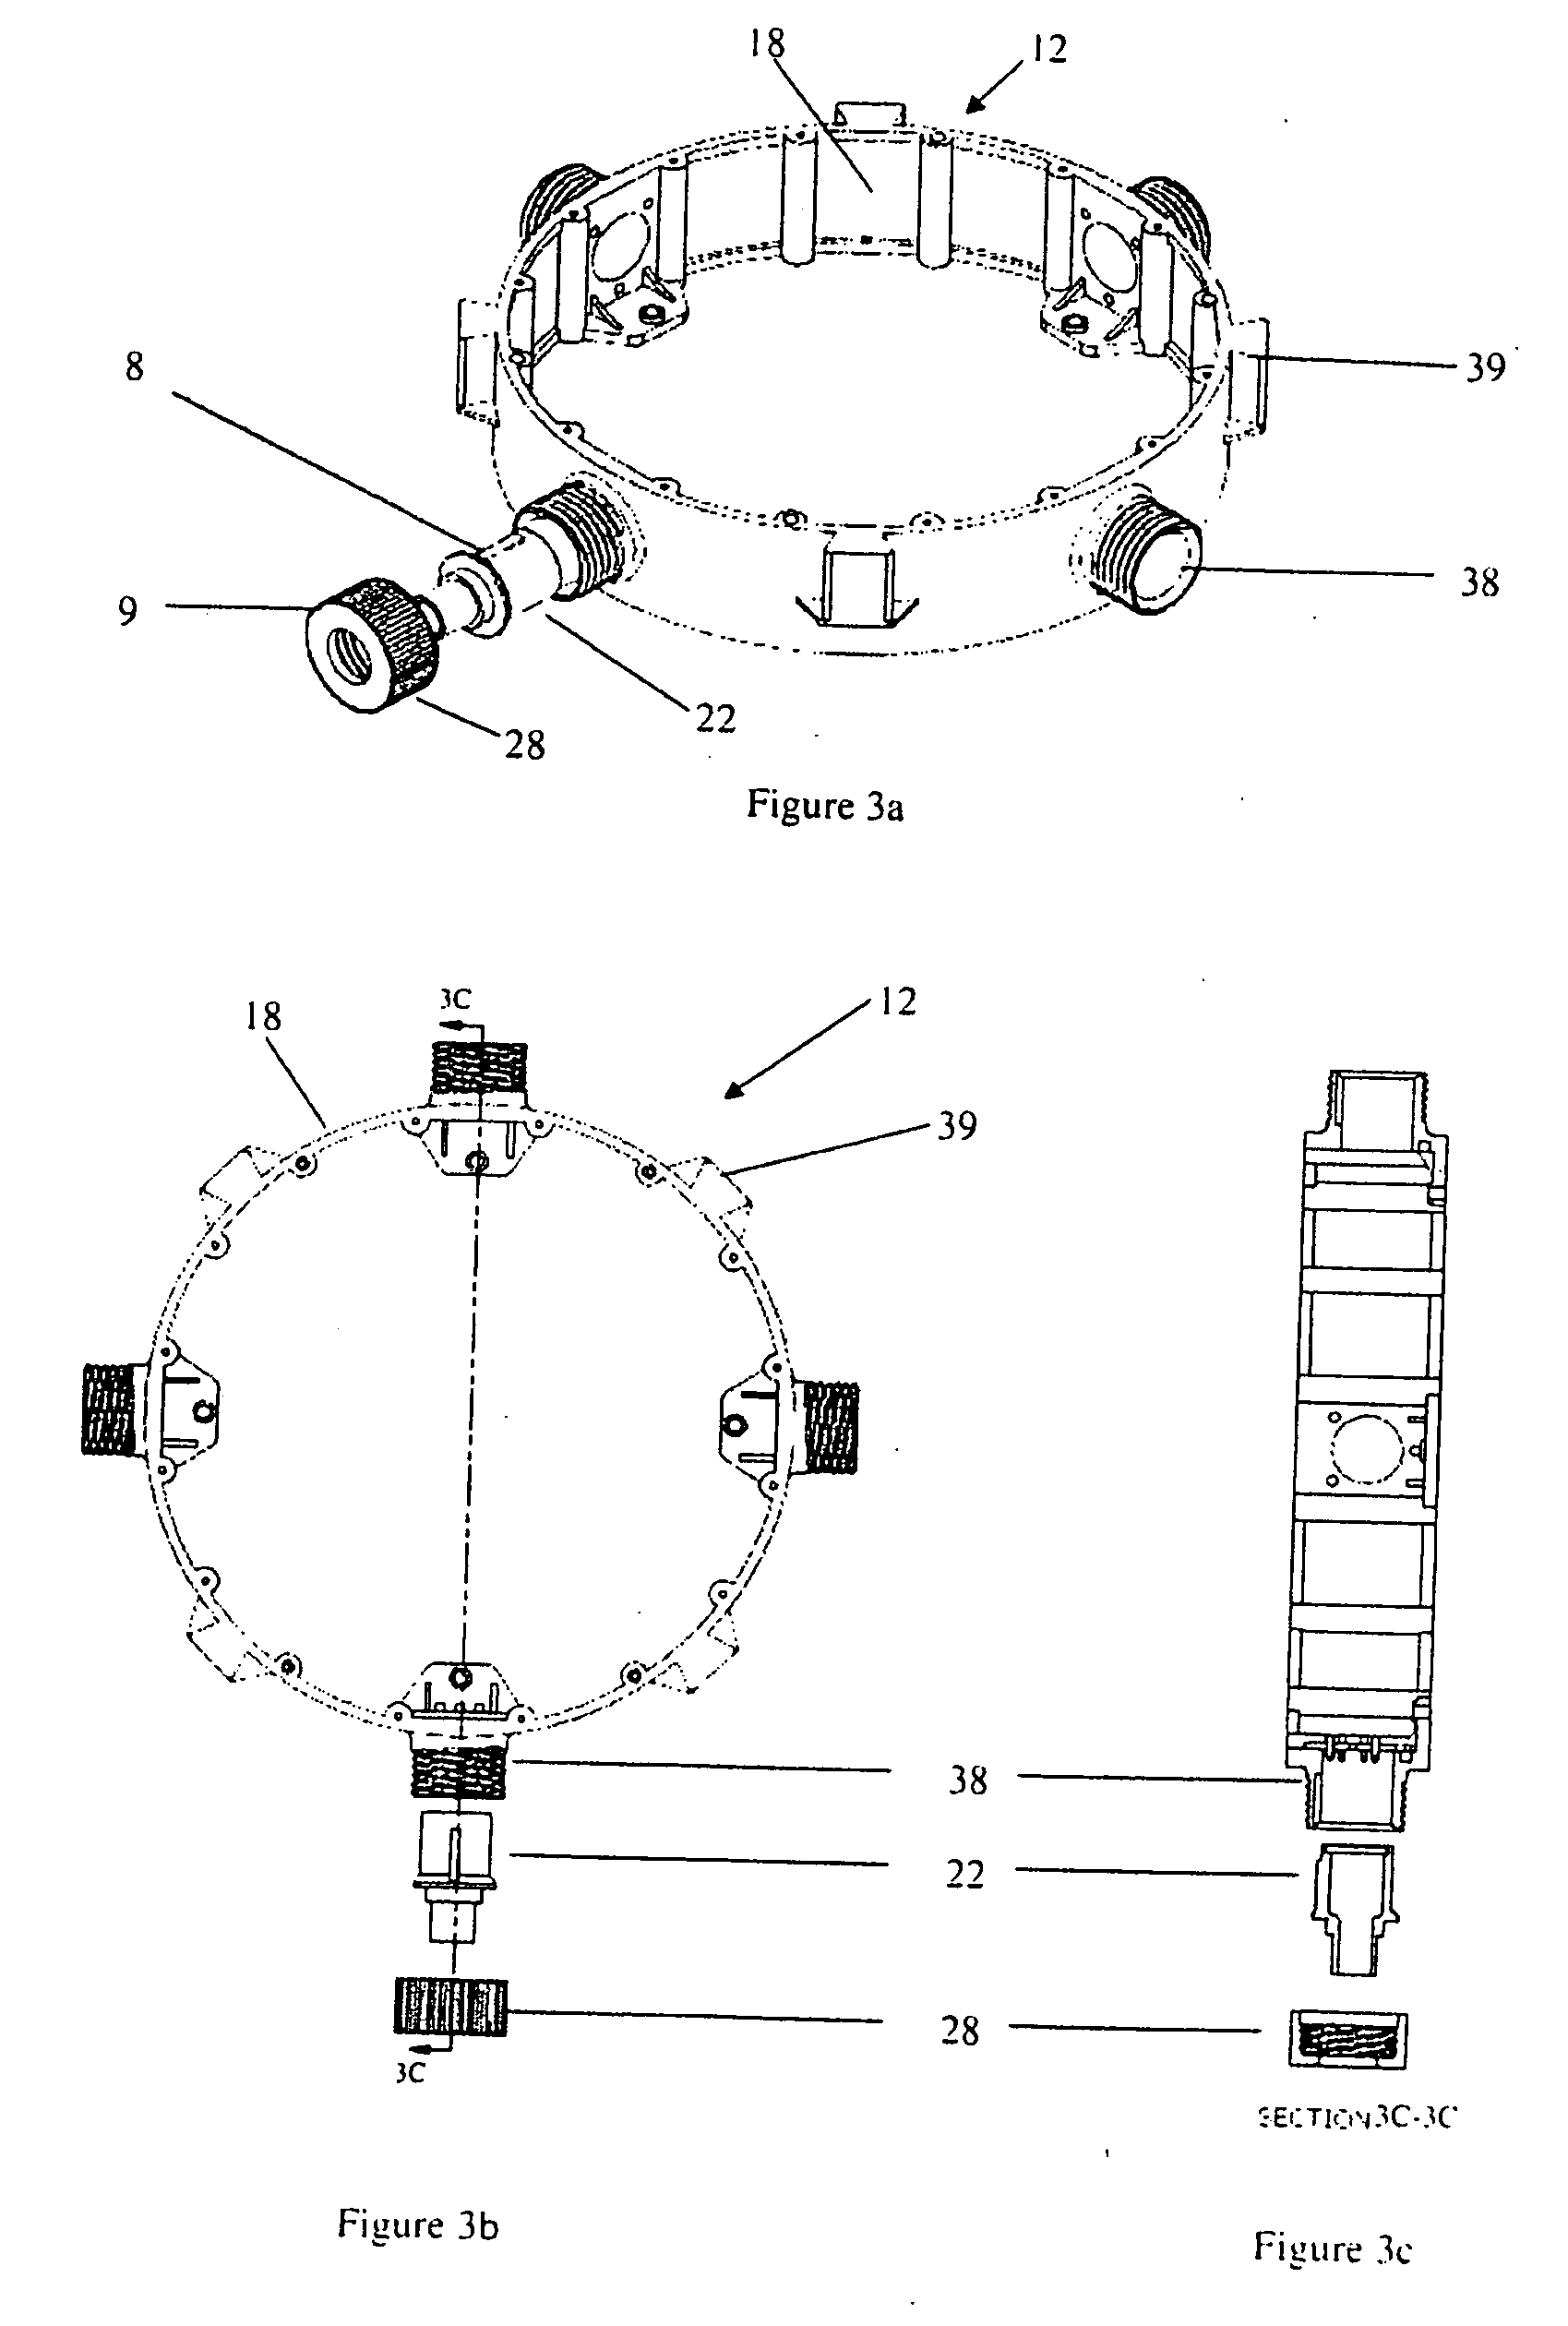 Hovering aerial vehicle with removable rotor arm assemblies